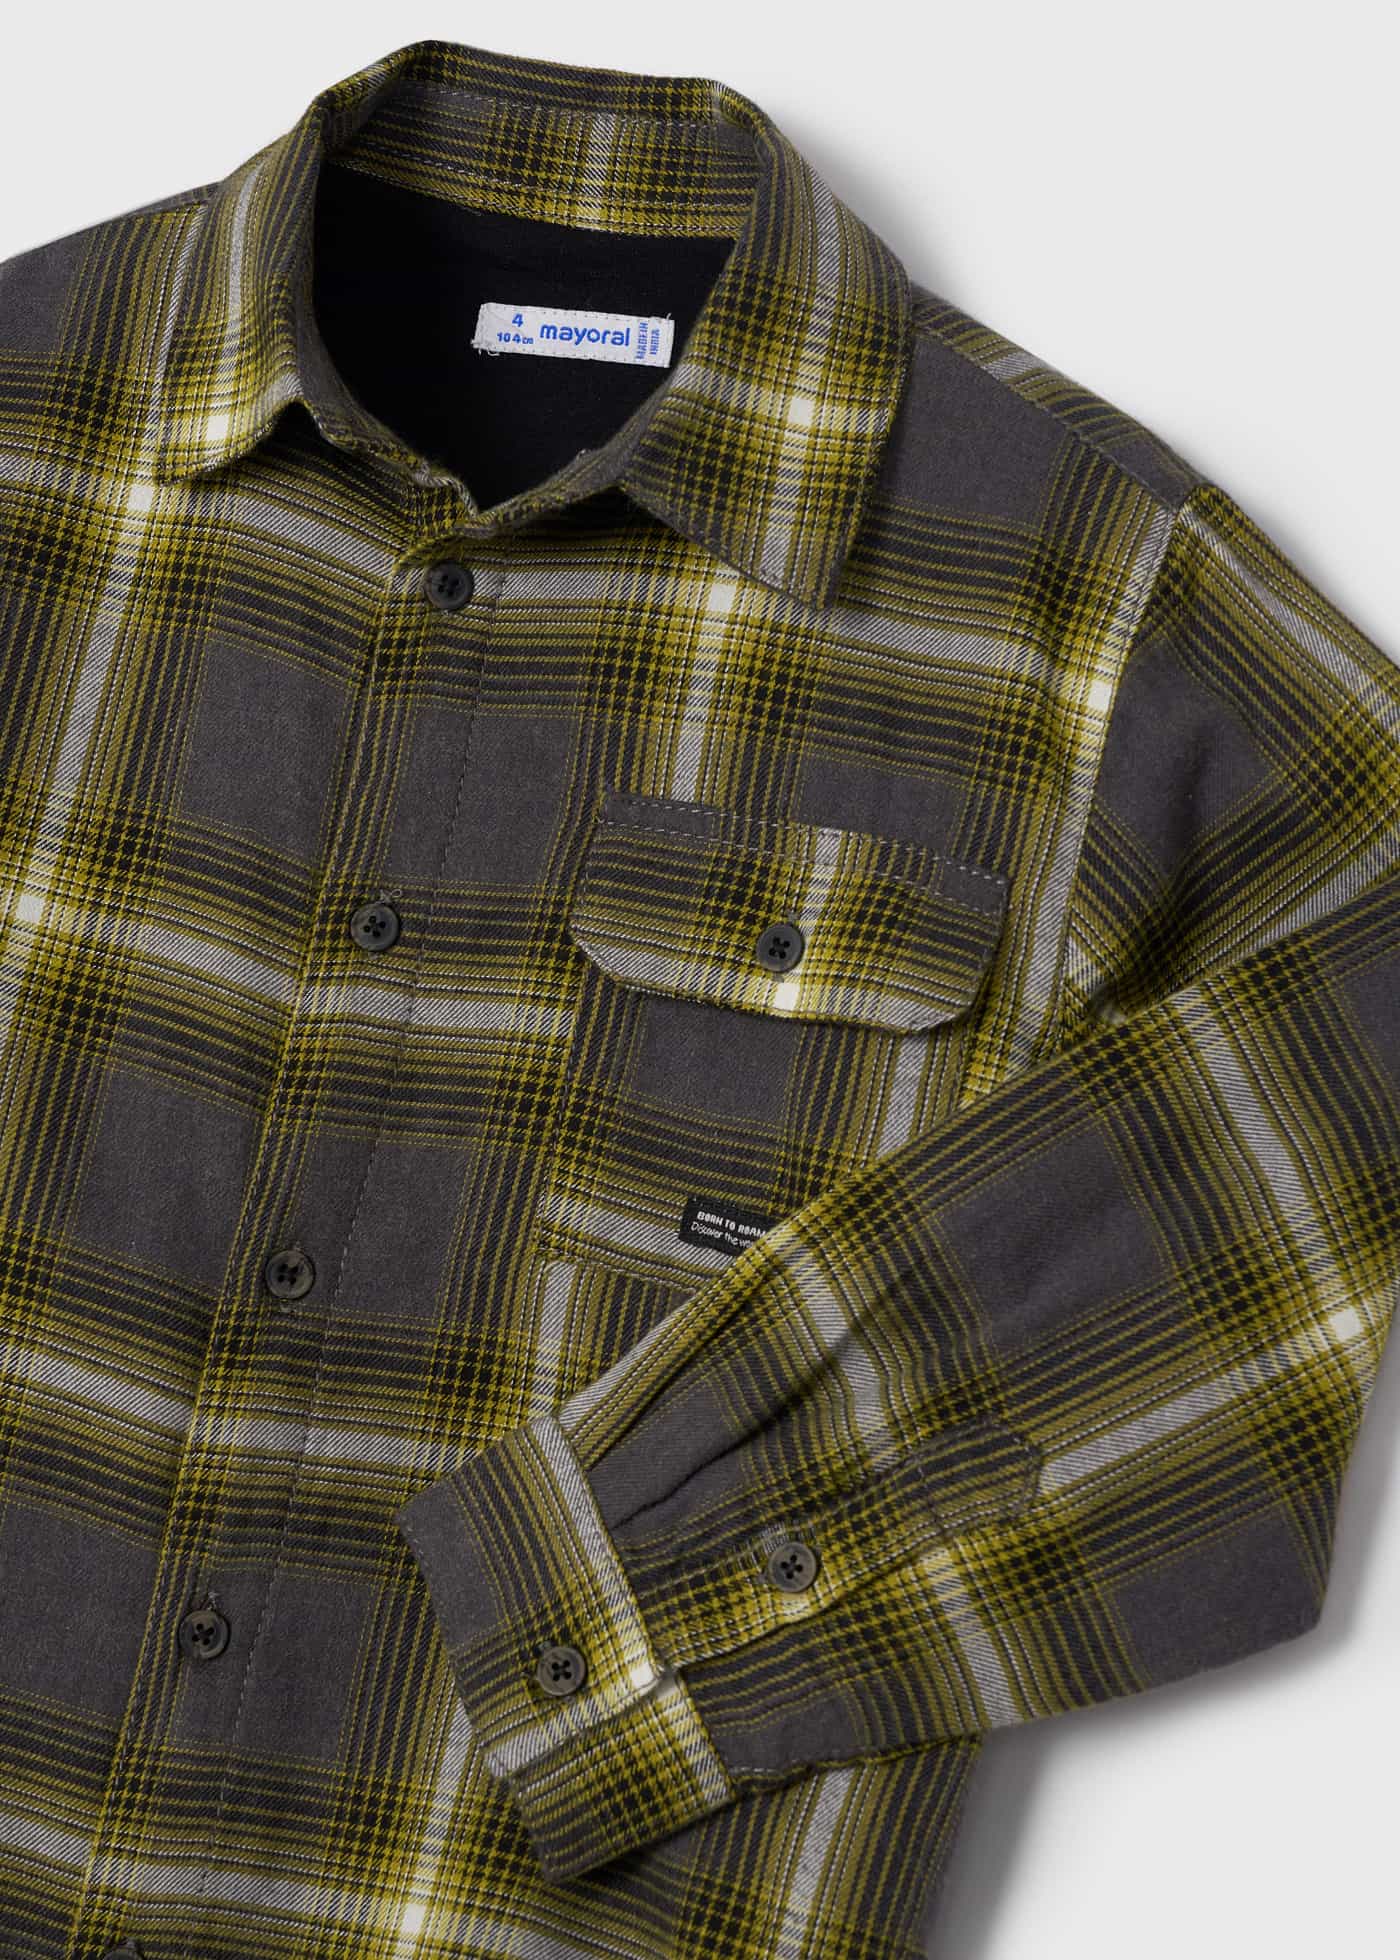 Plaid Overshirt in Charcoal/Mustard